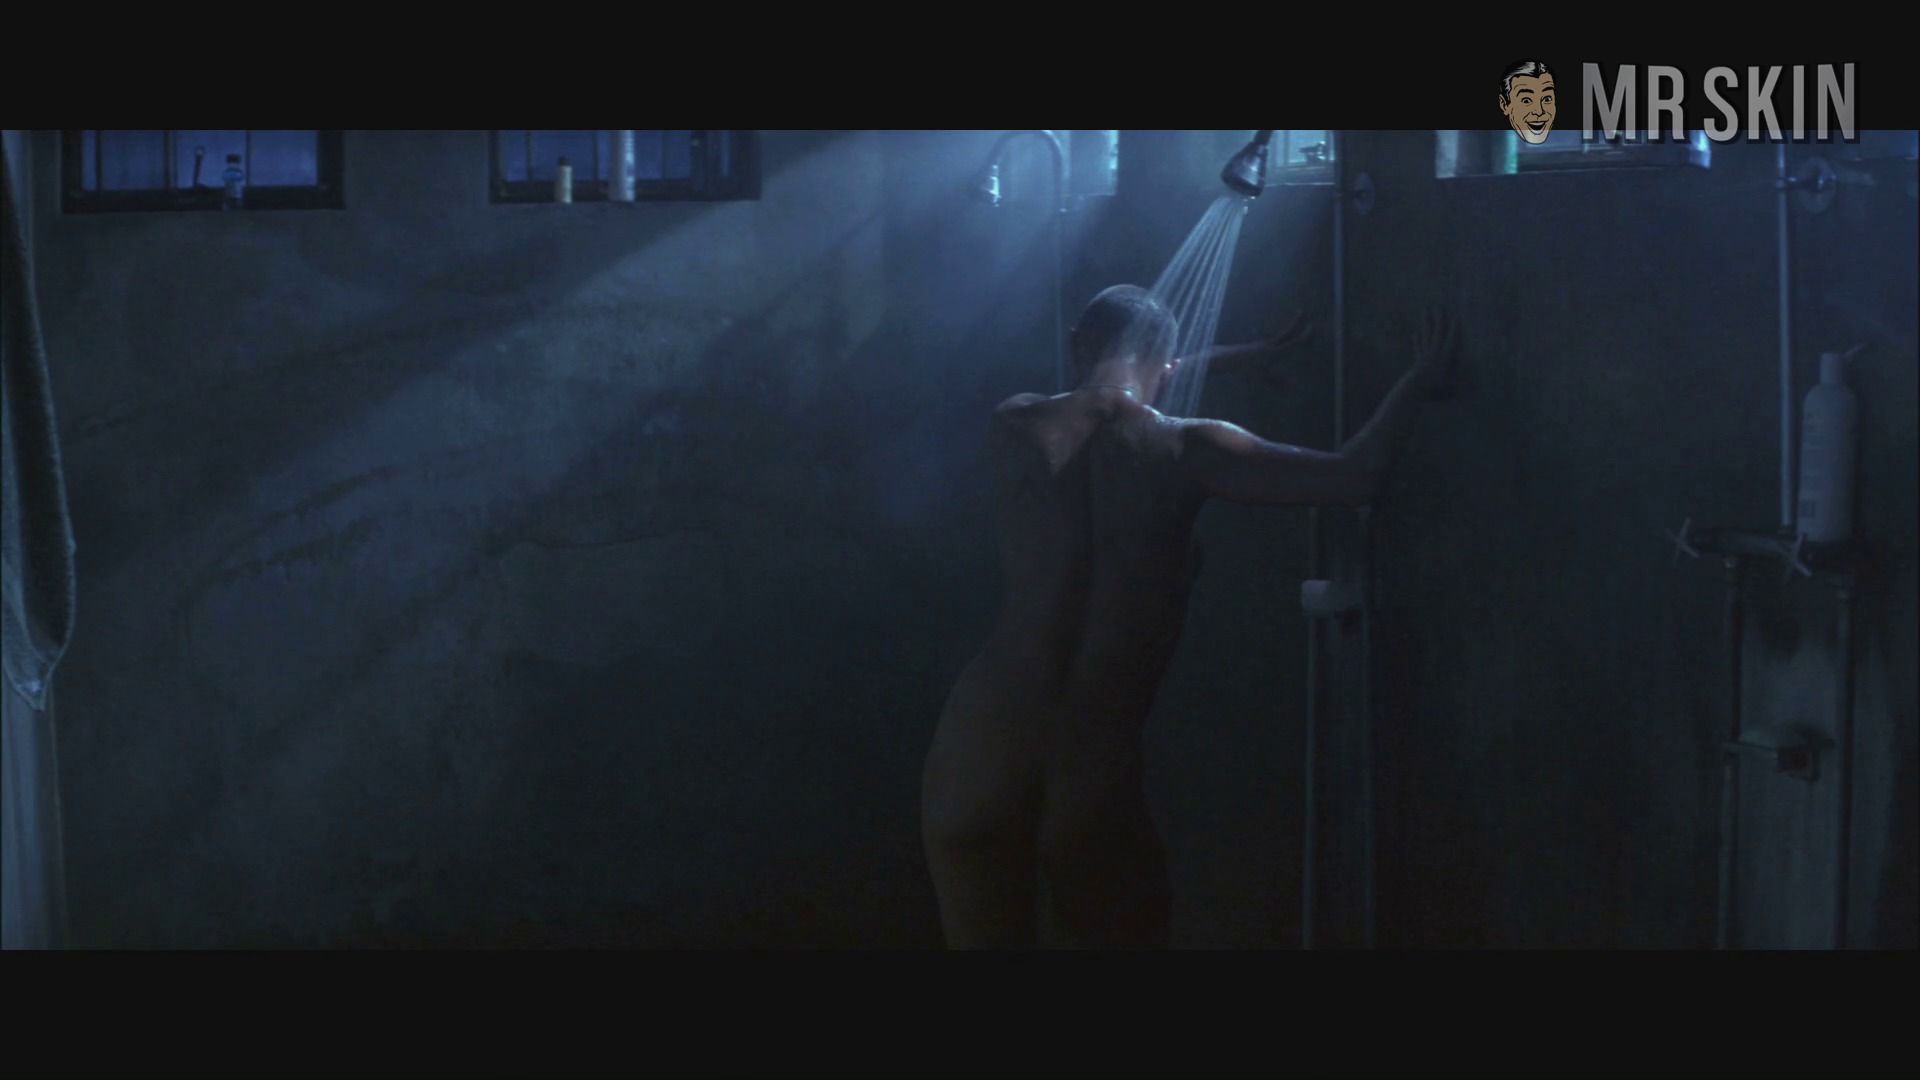 Demi sure looks naked during a dark shower scene, but she only serves up th...